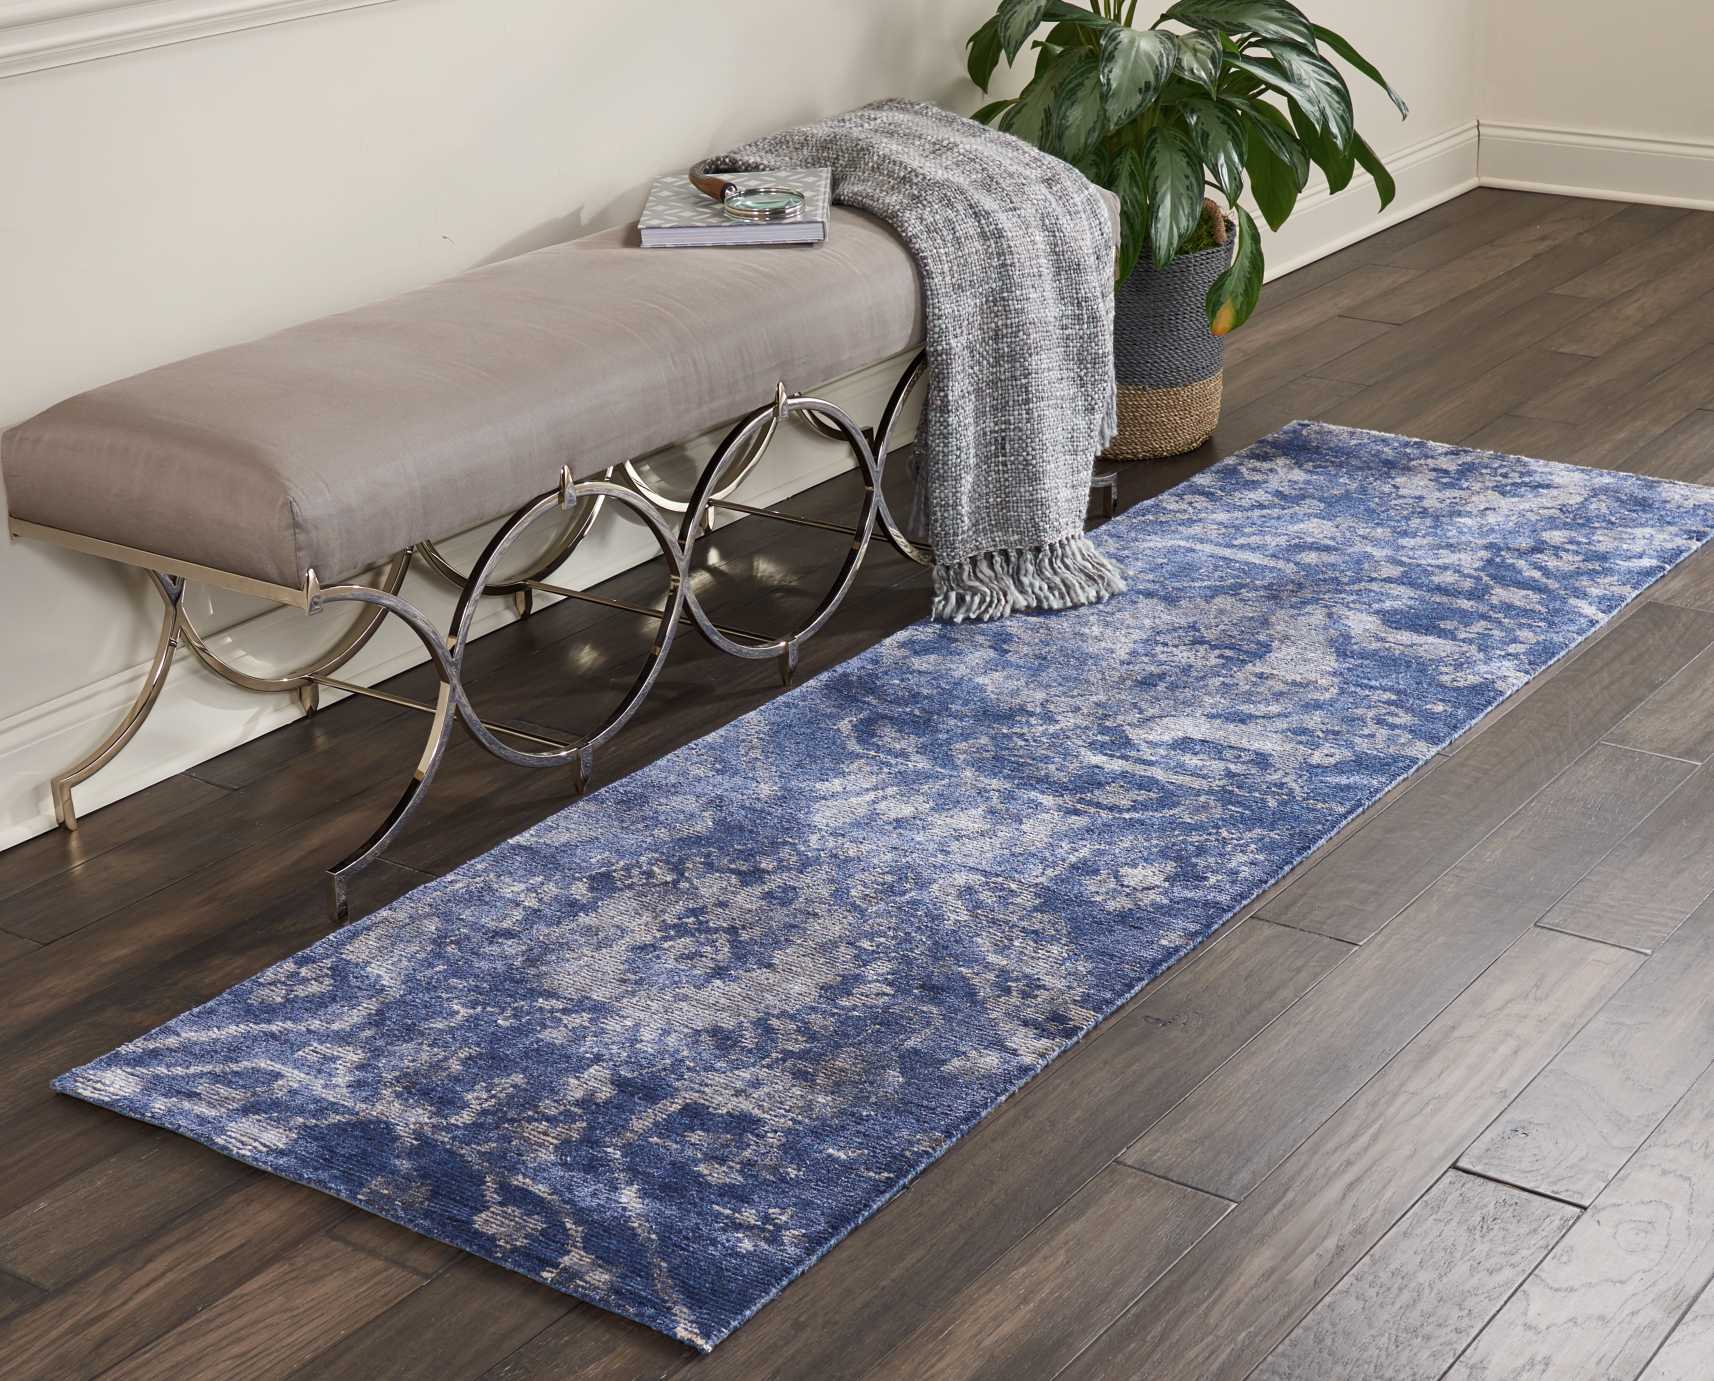 Contemporary interior with a blue and white patterned runner rug